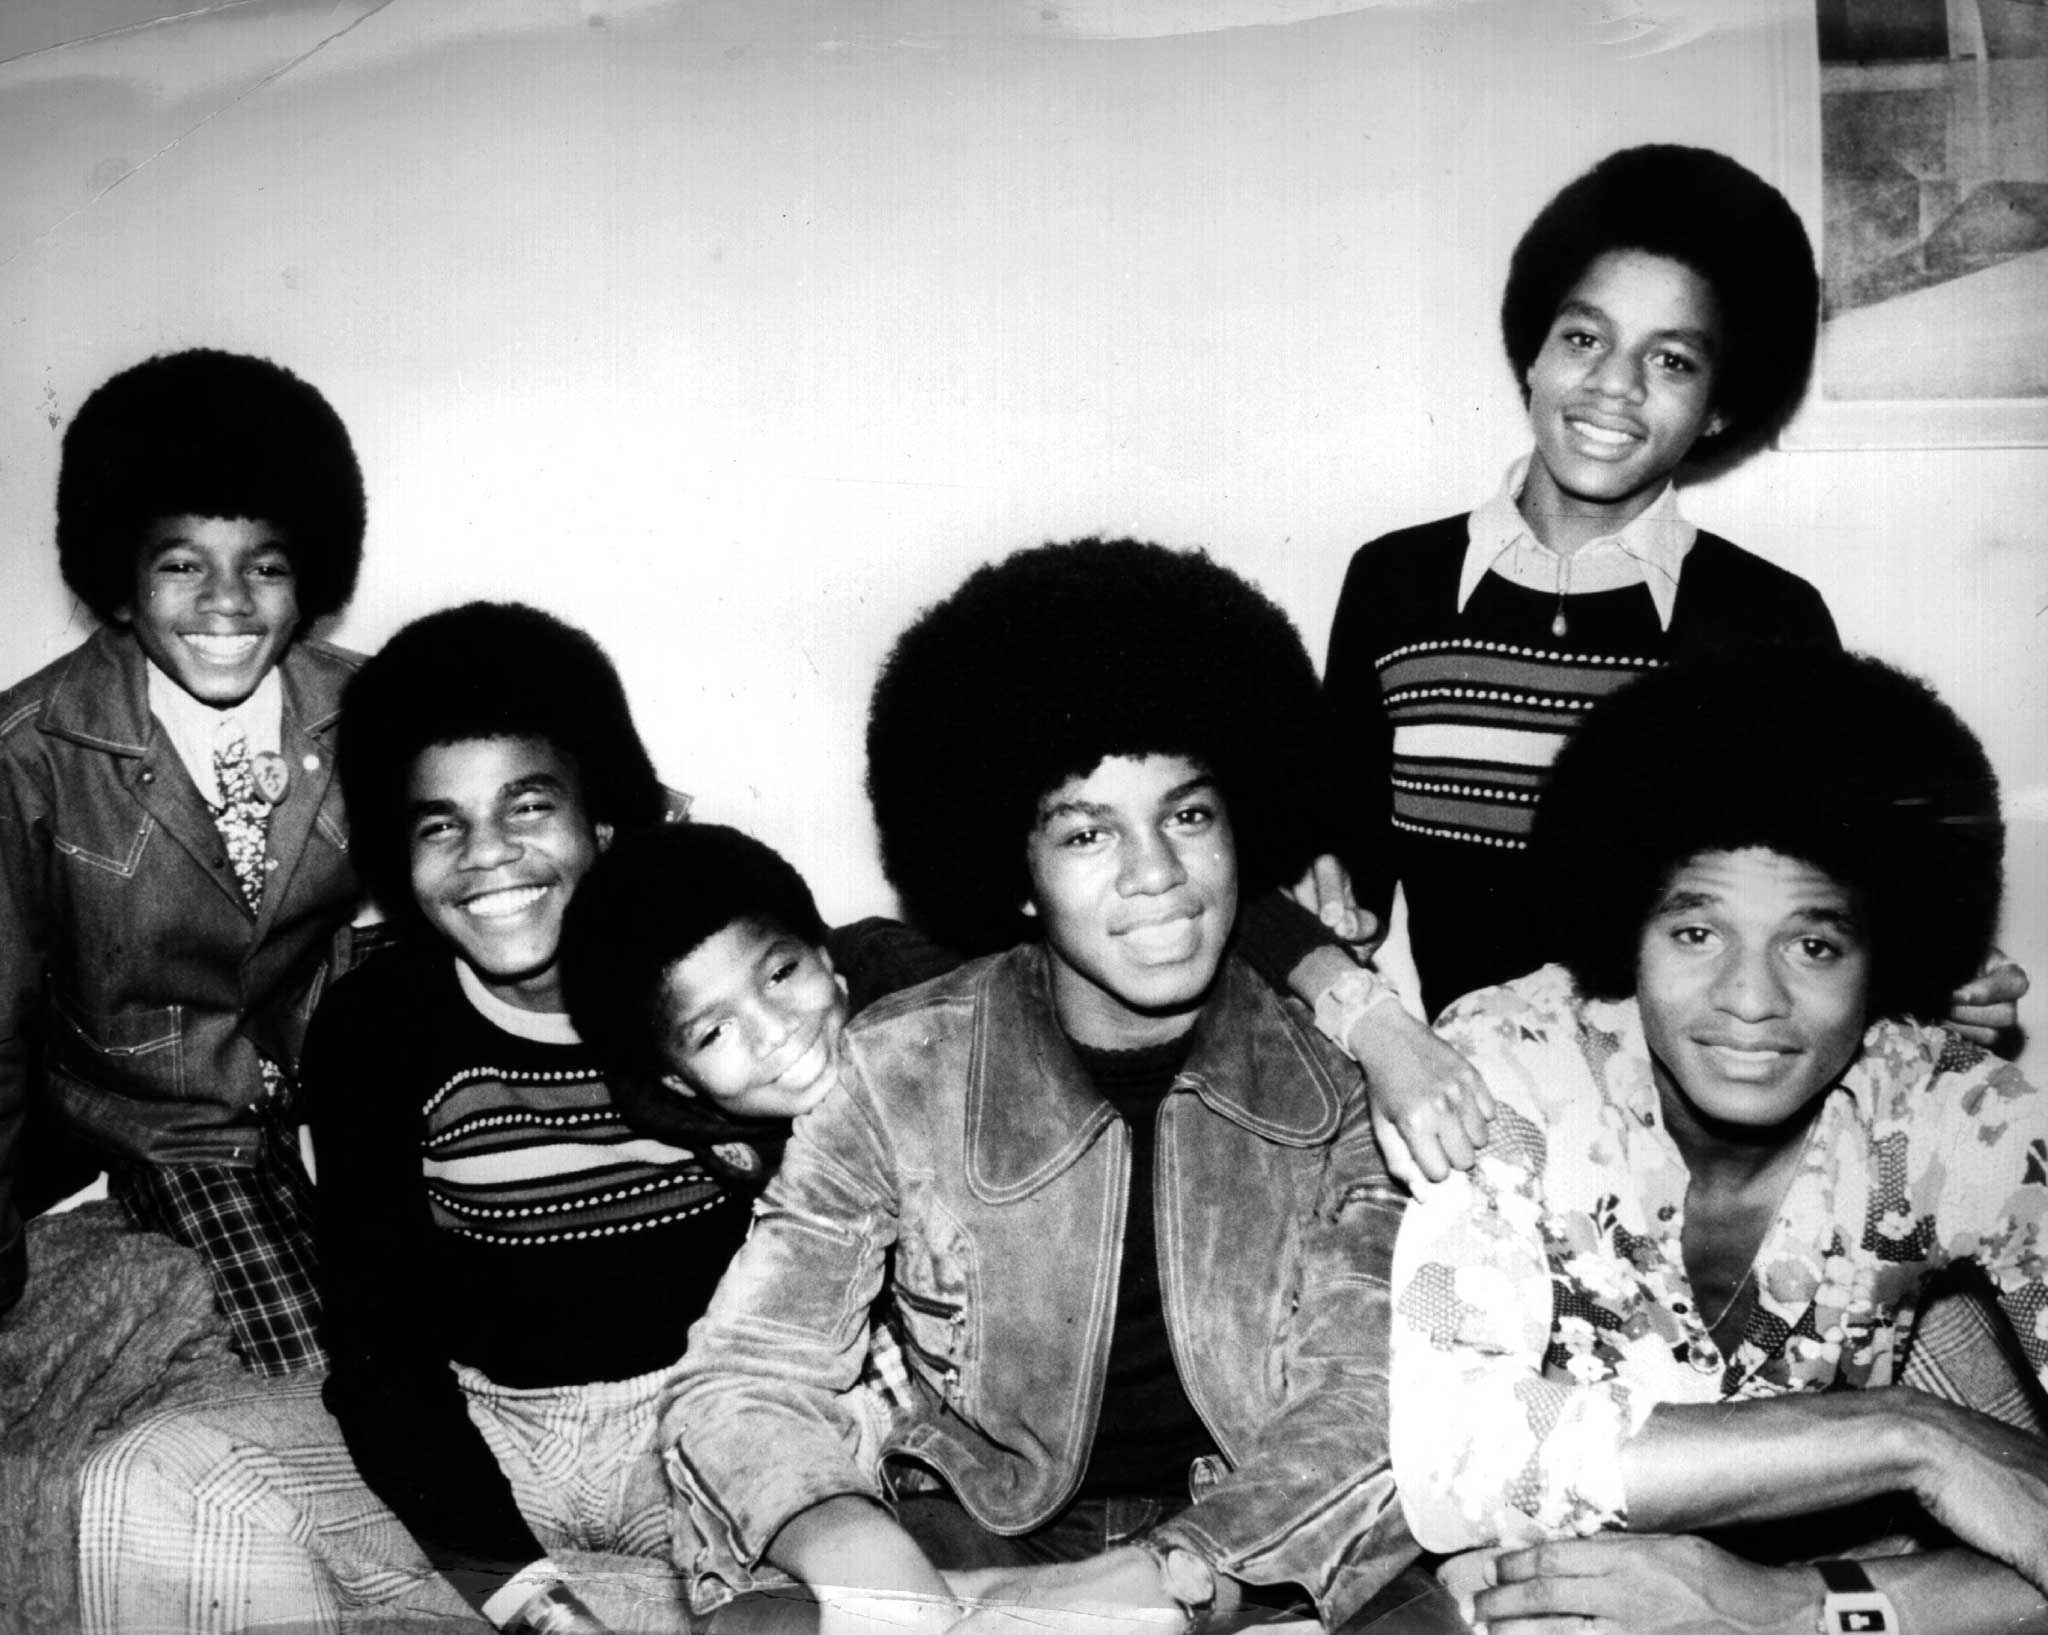 The Jacksons, Blame it on the Boogie: 'We spent the night in 'Frisco/ At every kind of disco.'